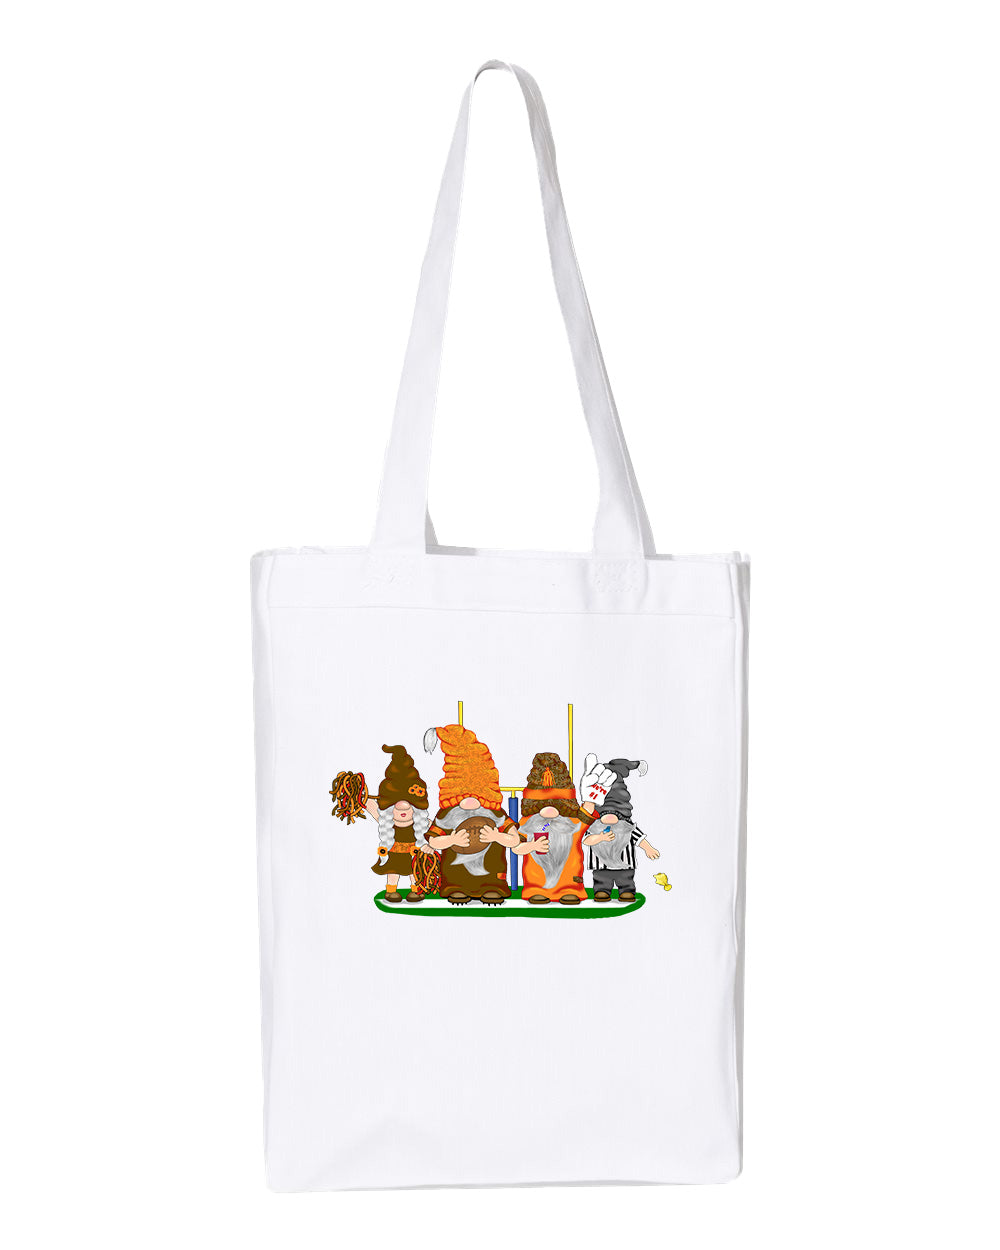 Orange & Brown Football Gnomes  (similar to Cleveland) on Gusset Tote